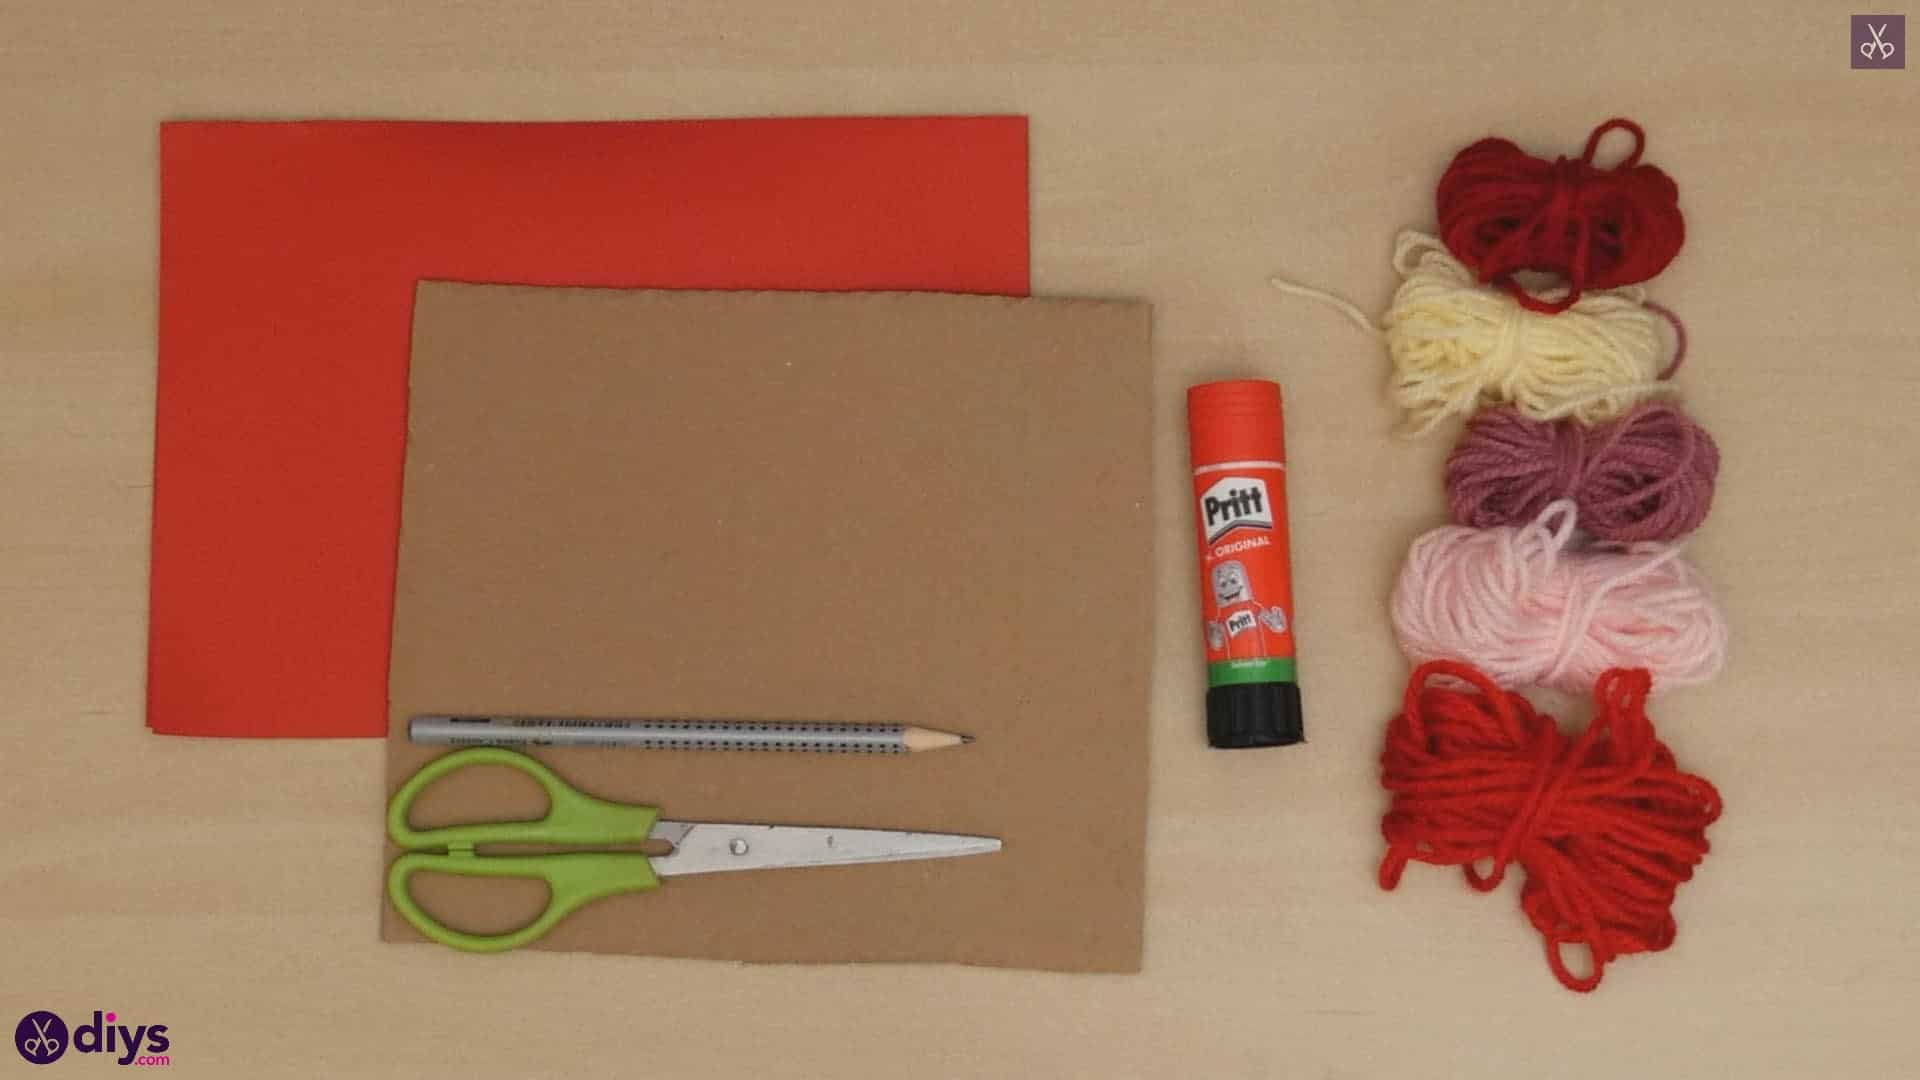 Diy yarn wrapped paper heart materials